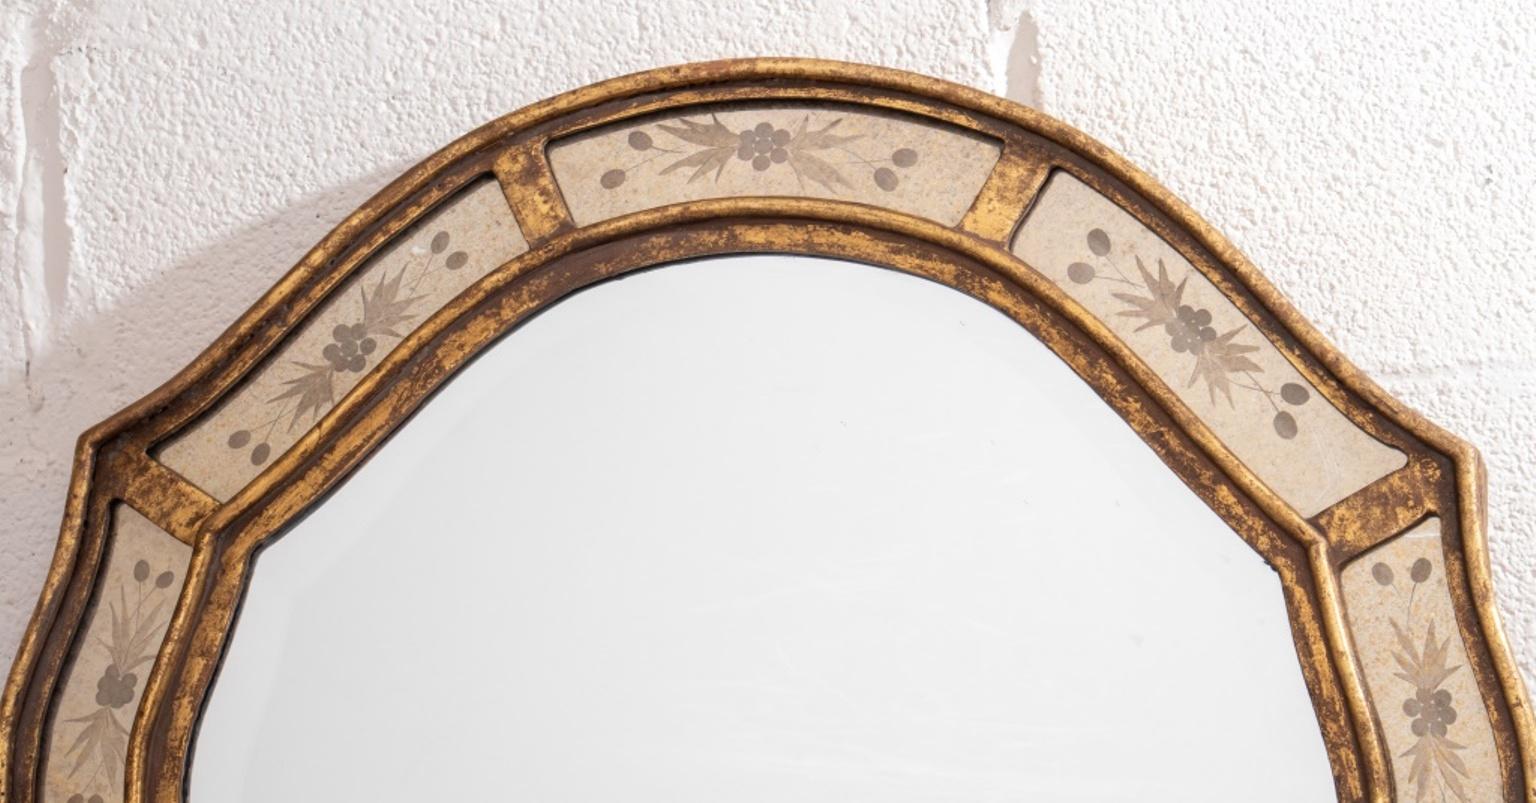 Hollywood Regency giltwood mirror, in the Venetian taste with a shaped central plate surrounded by twelve conforming small floral etched plates. Measures : 35